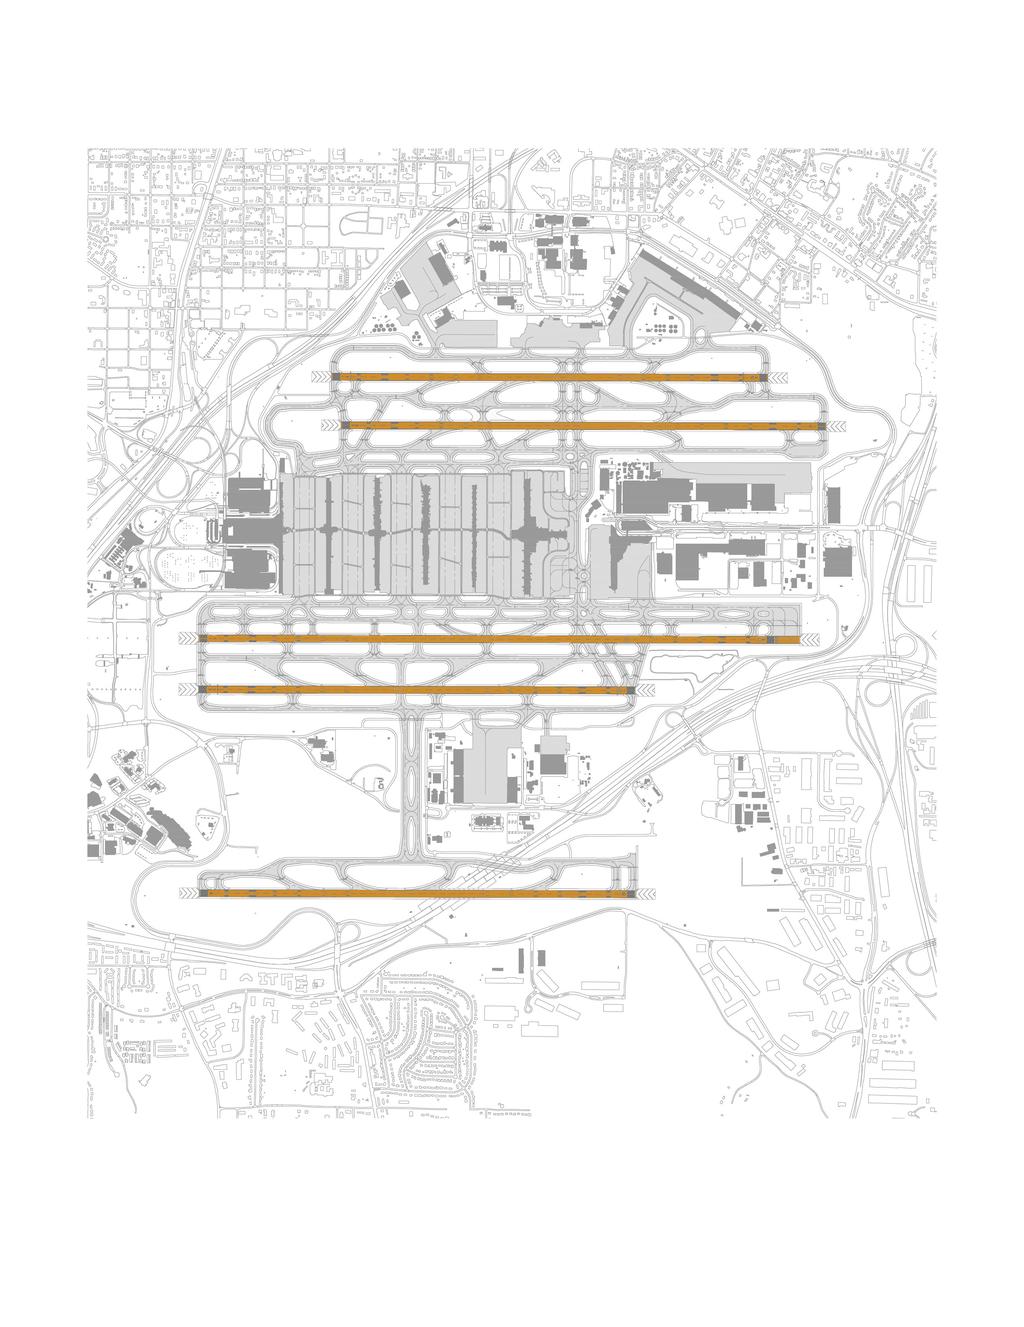 Airfield Facilities Runway Site Alternatives The airfield at Hartsfield-Jackson Atlanta International Airport consists of Several enabling projects related to the Closely Spaced Runway are runways,